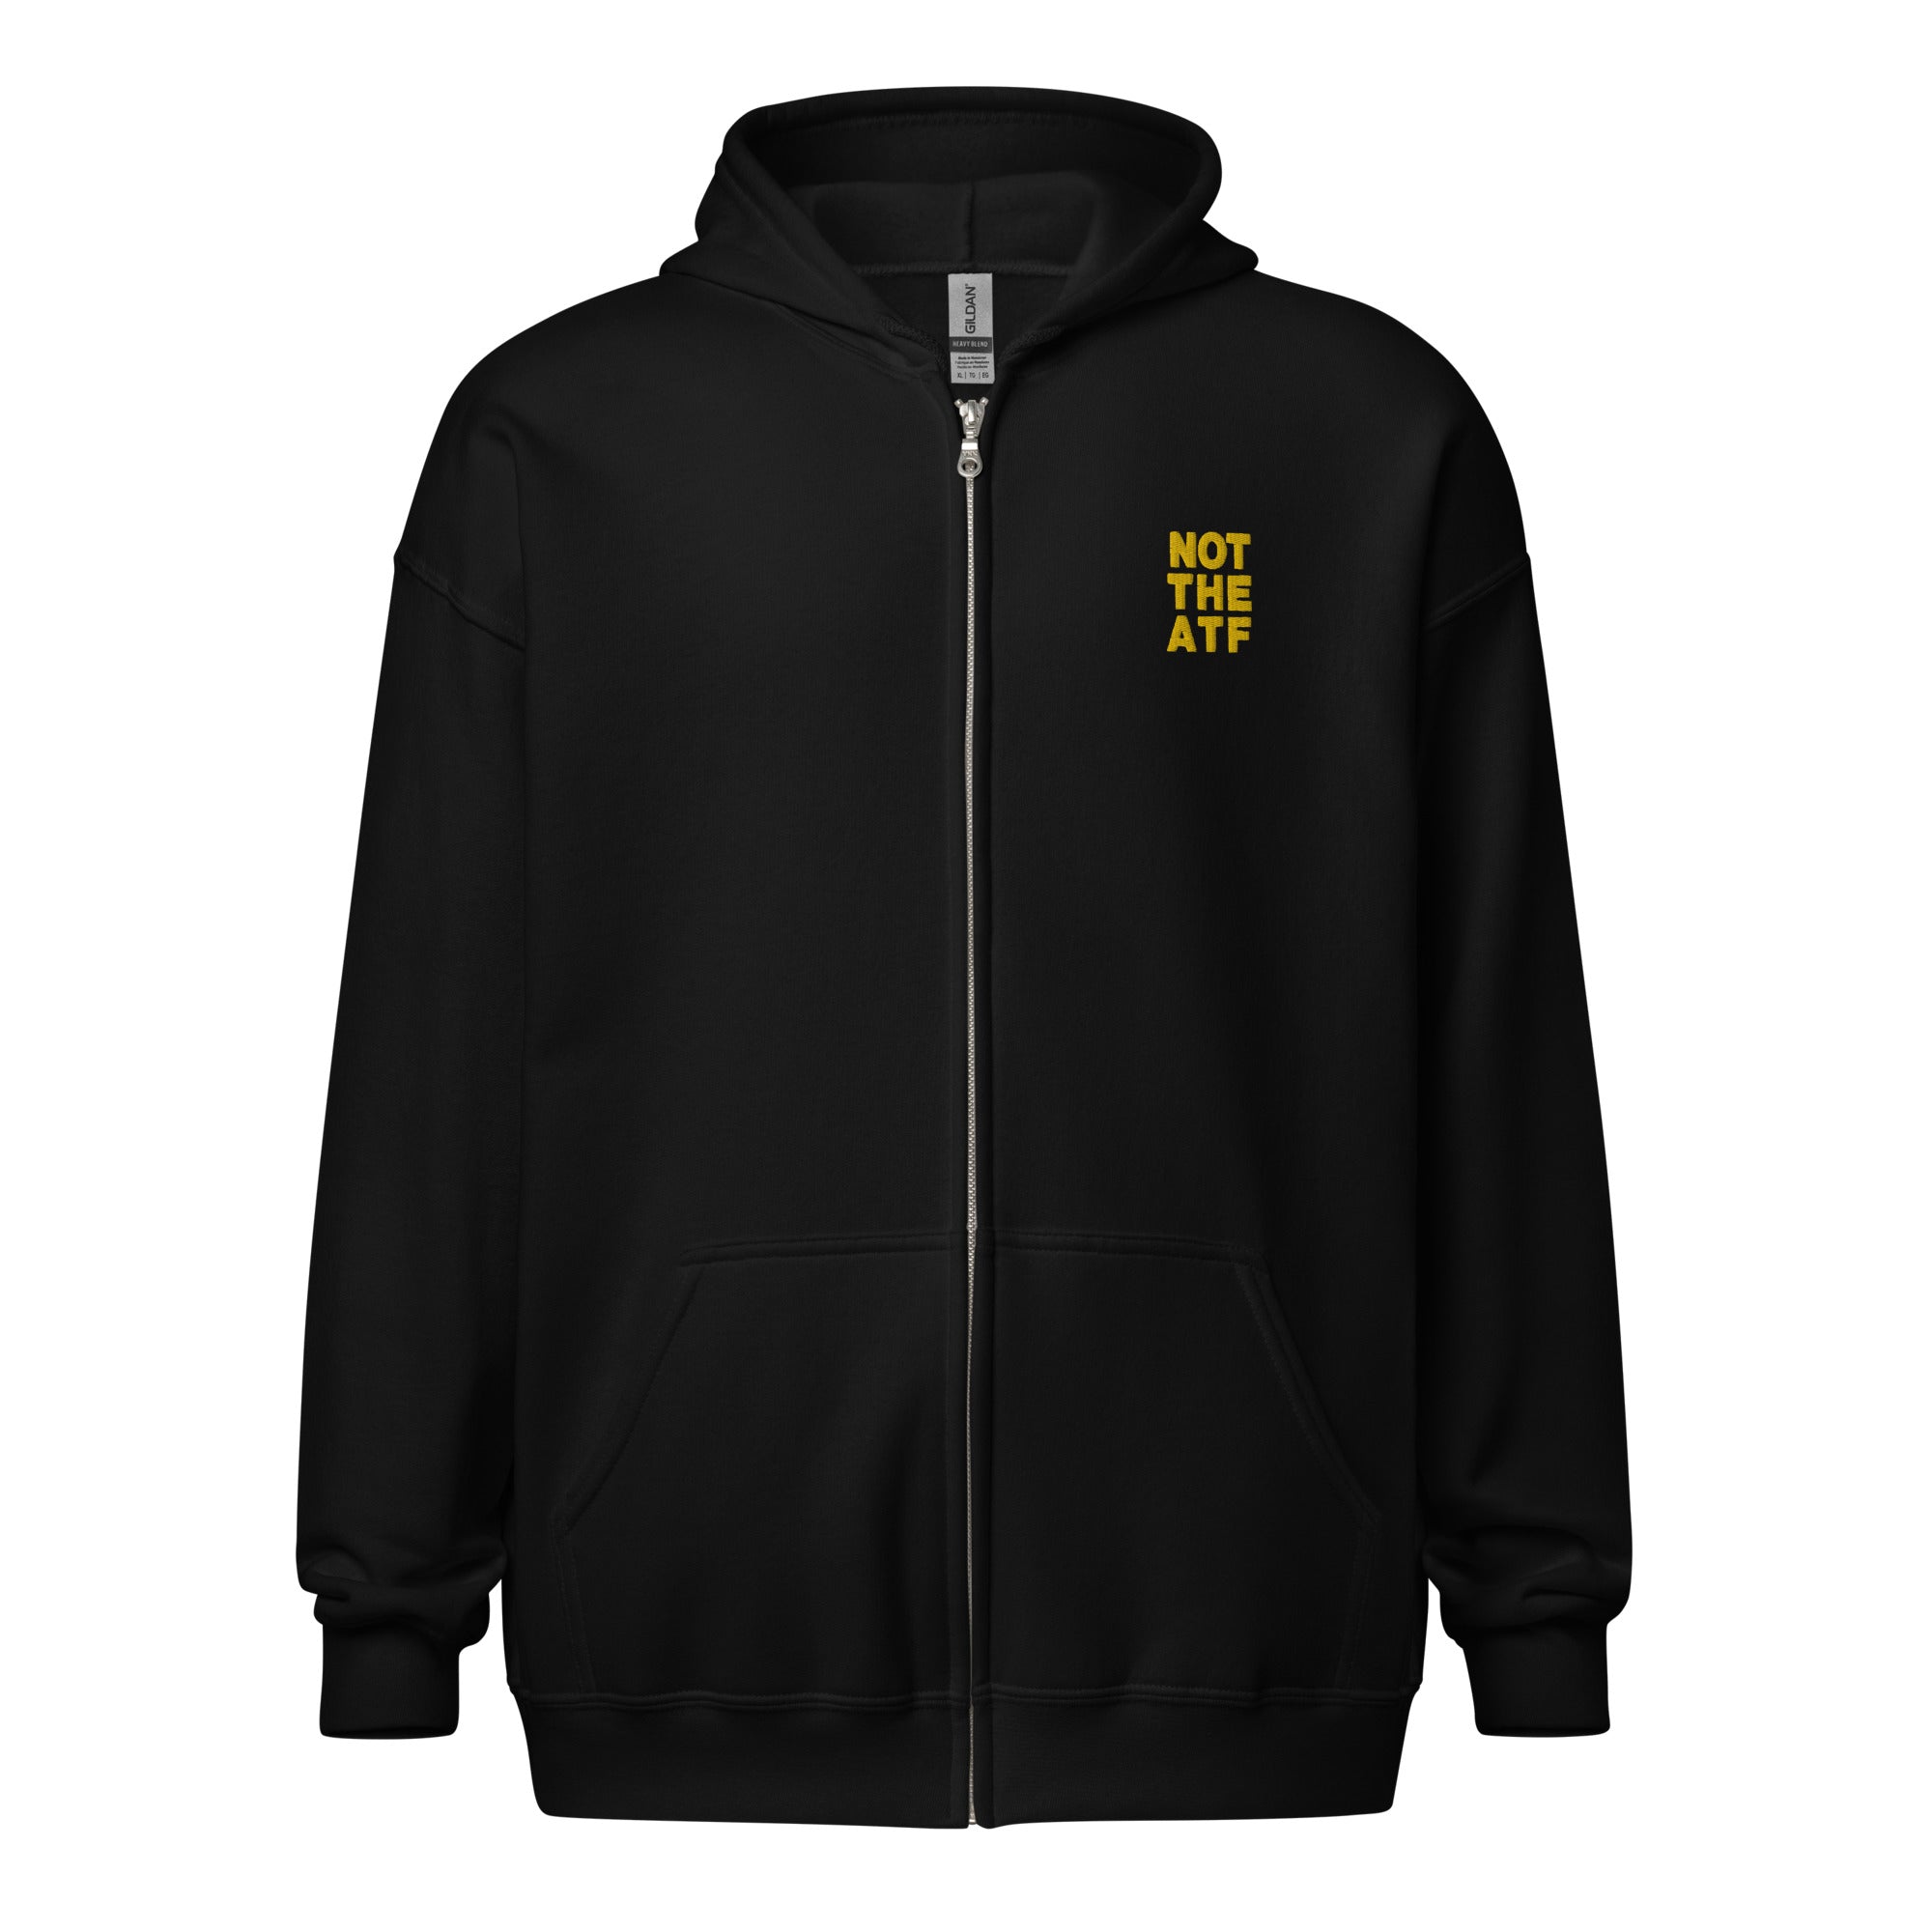 NOT THE ATF Hoodie